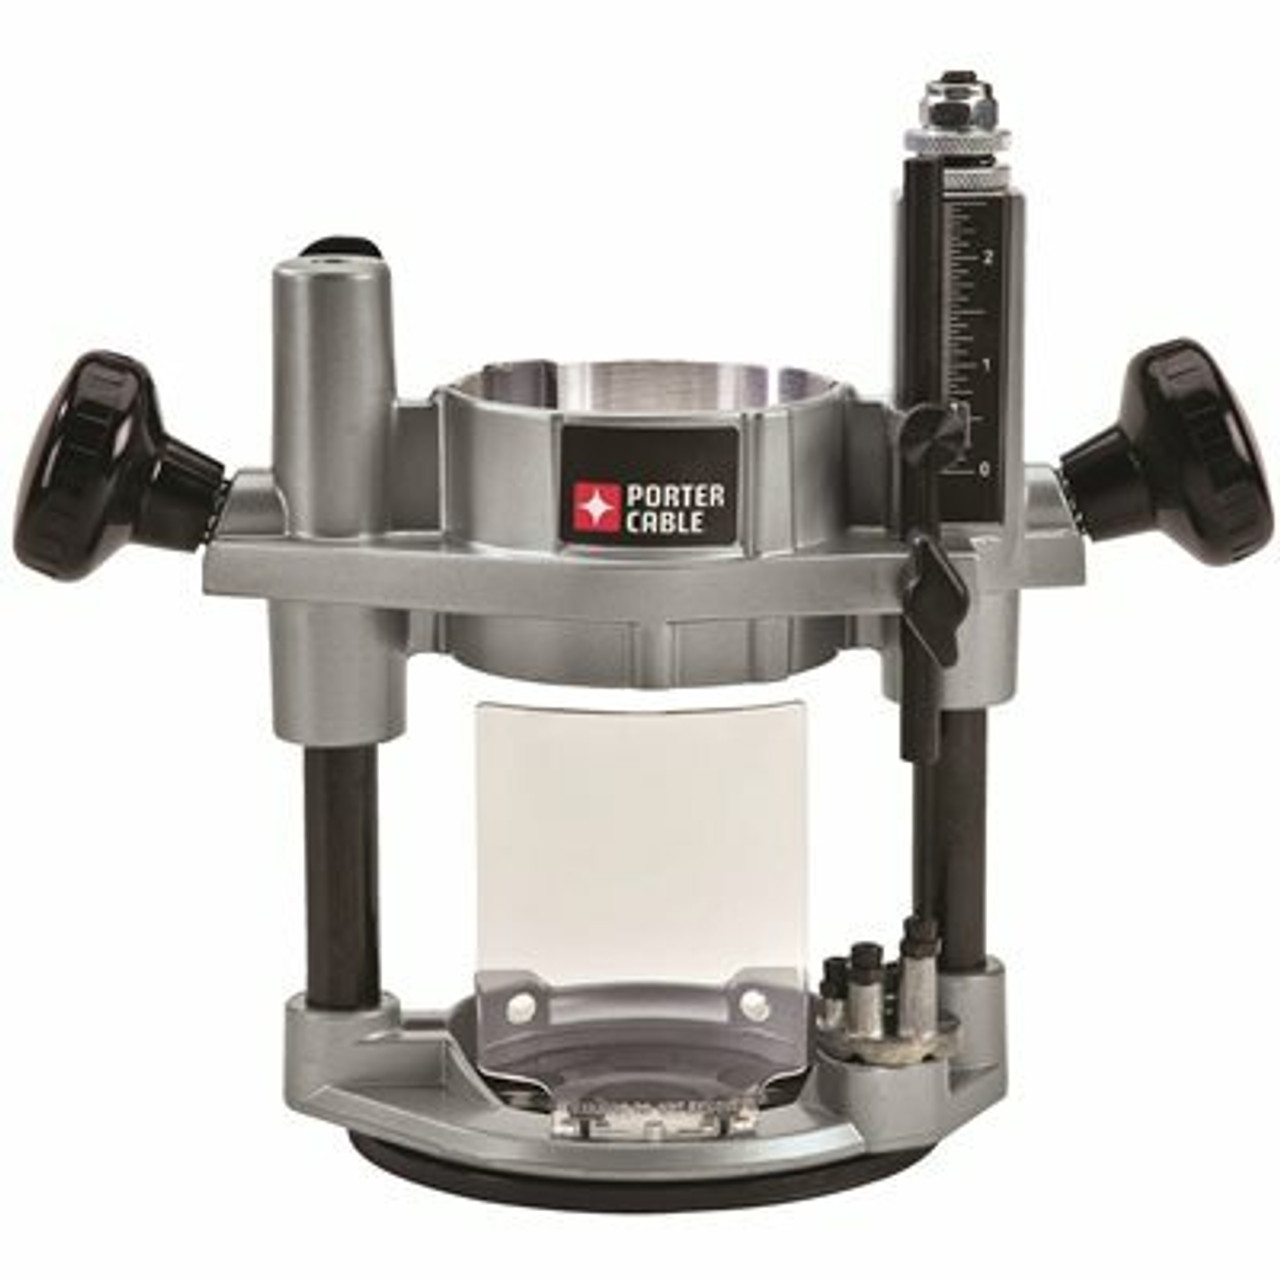 Porter-Cable Plunge Base For 690 Series Routers